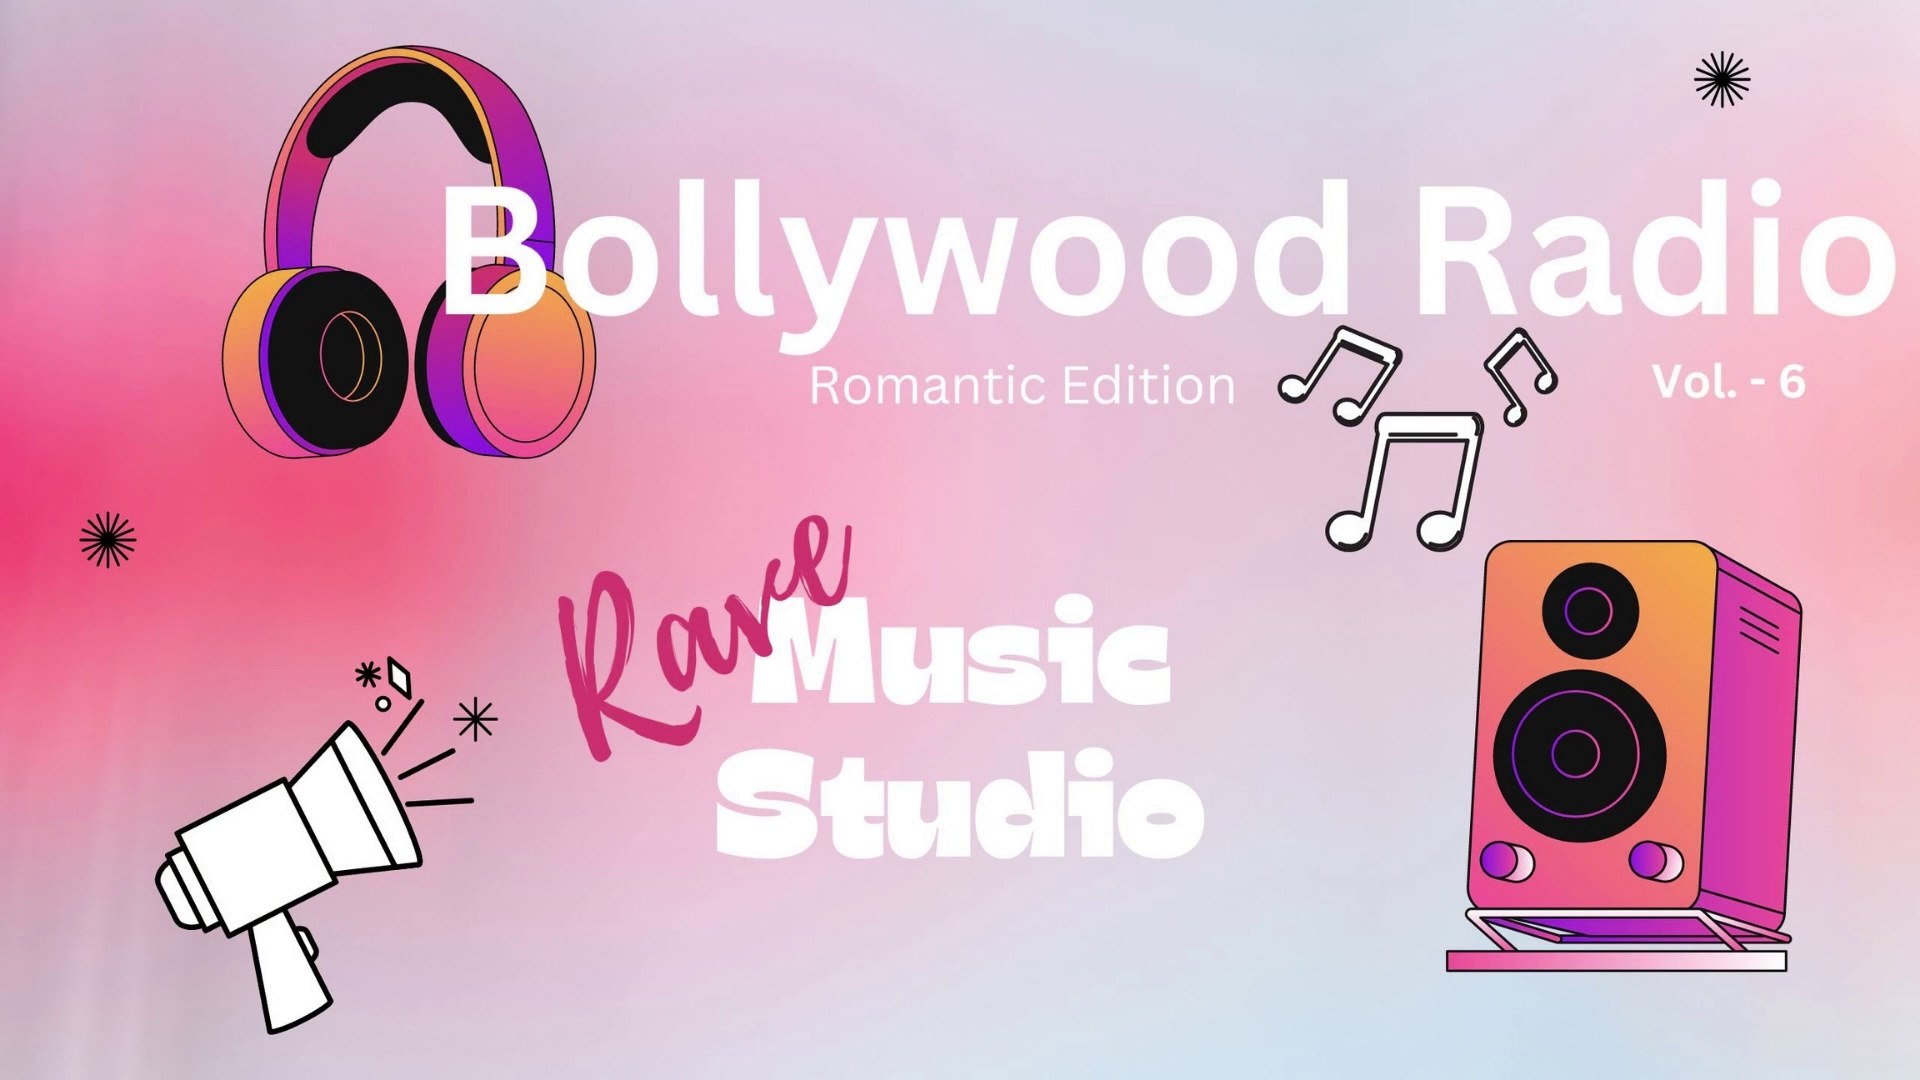 Bollywood Radio - Non Stop Music by Rave Music Studio - Dailymotion